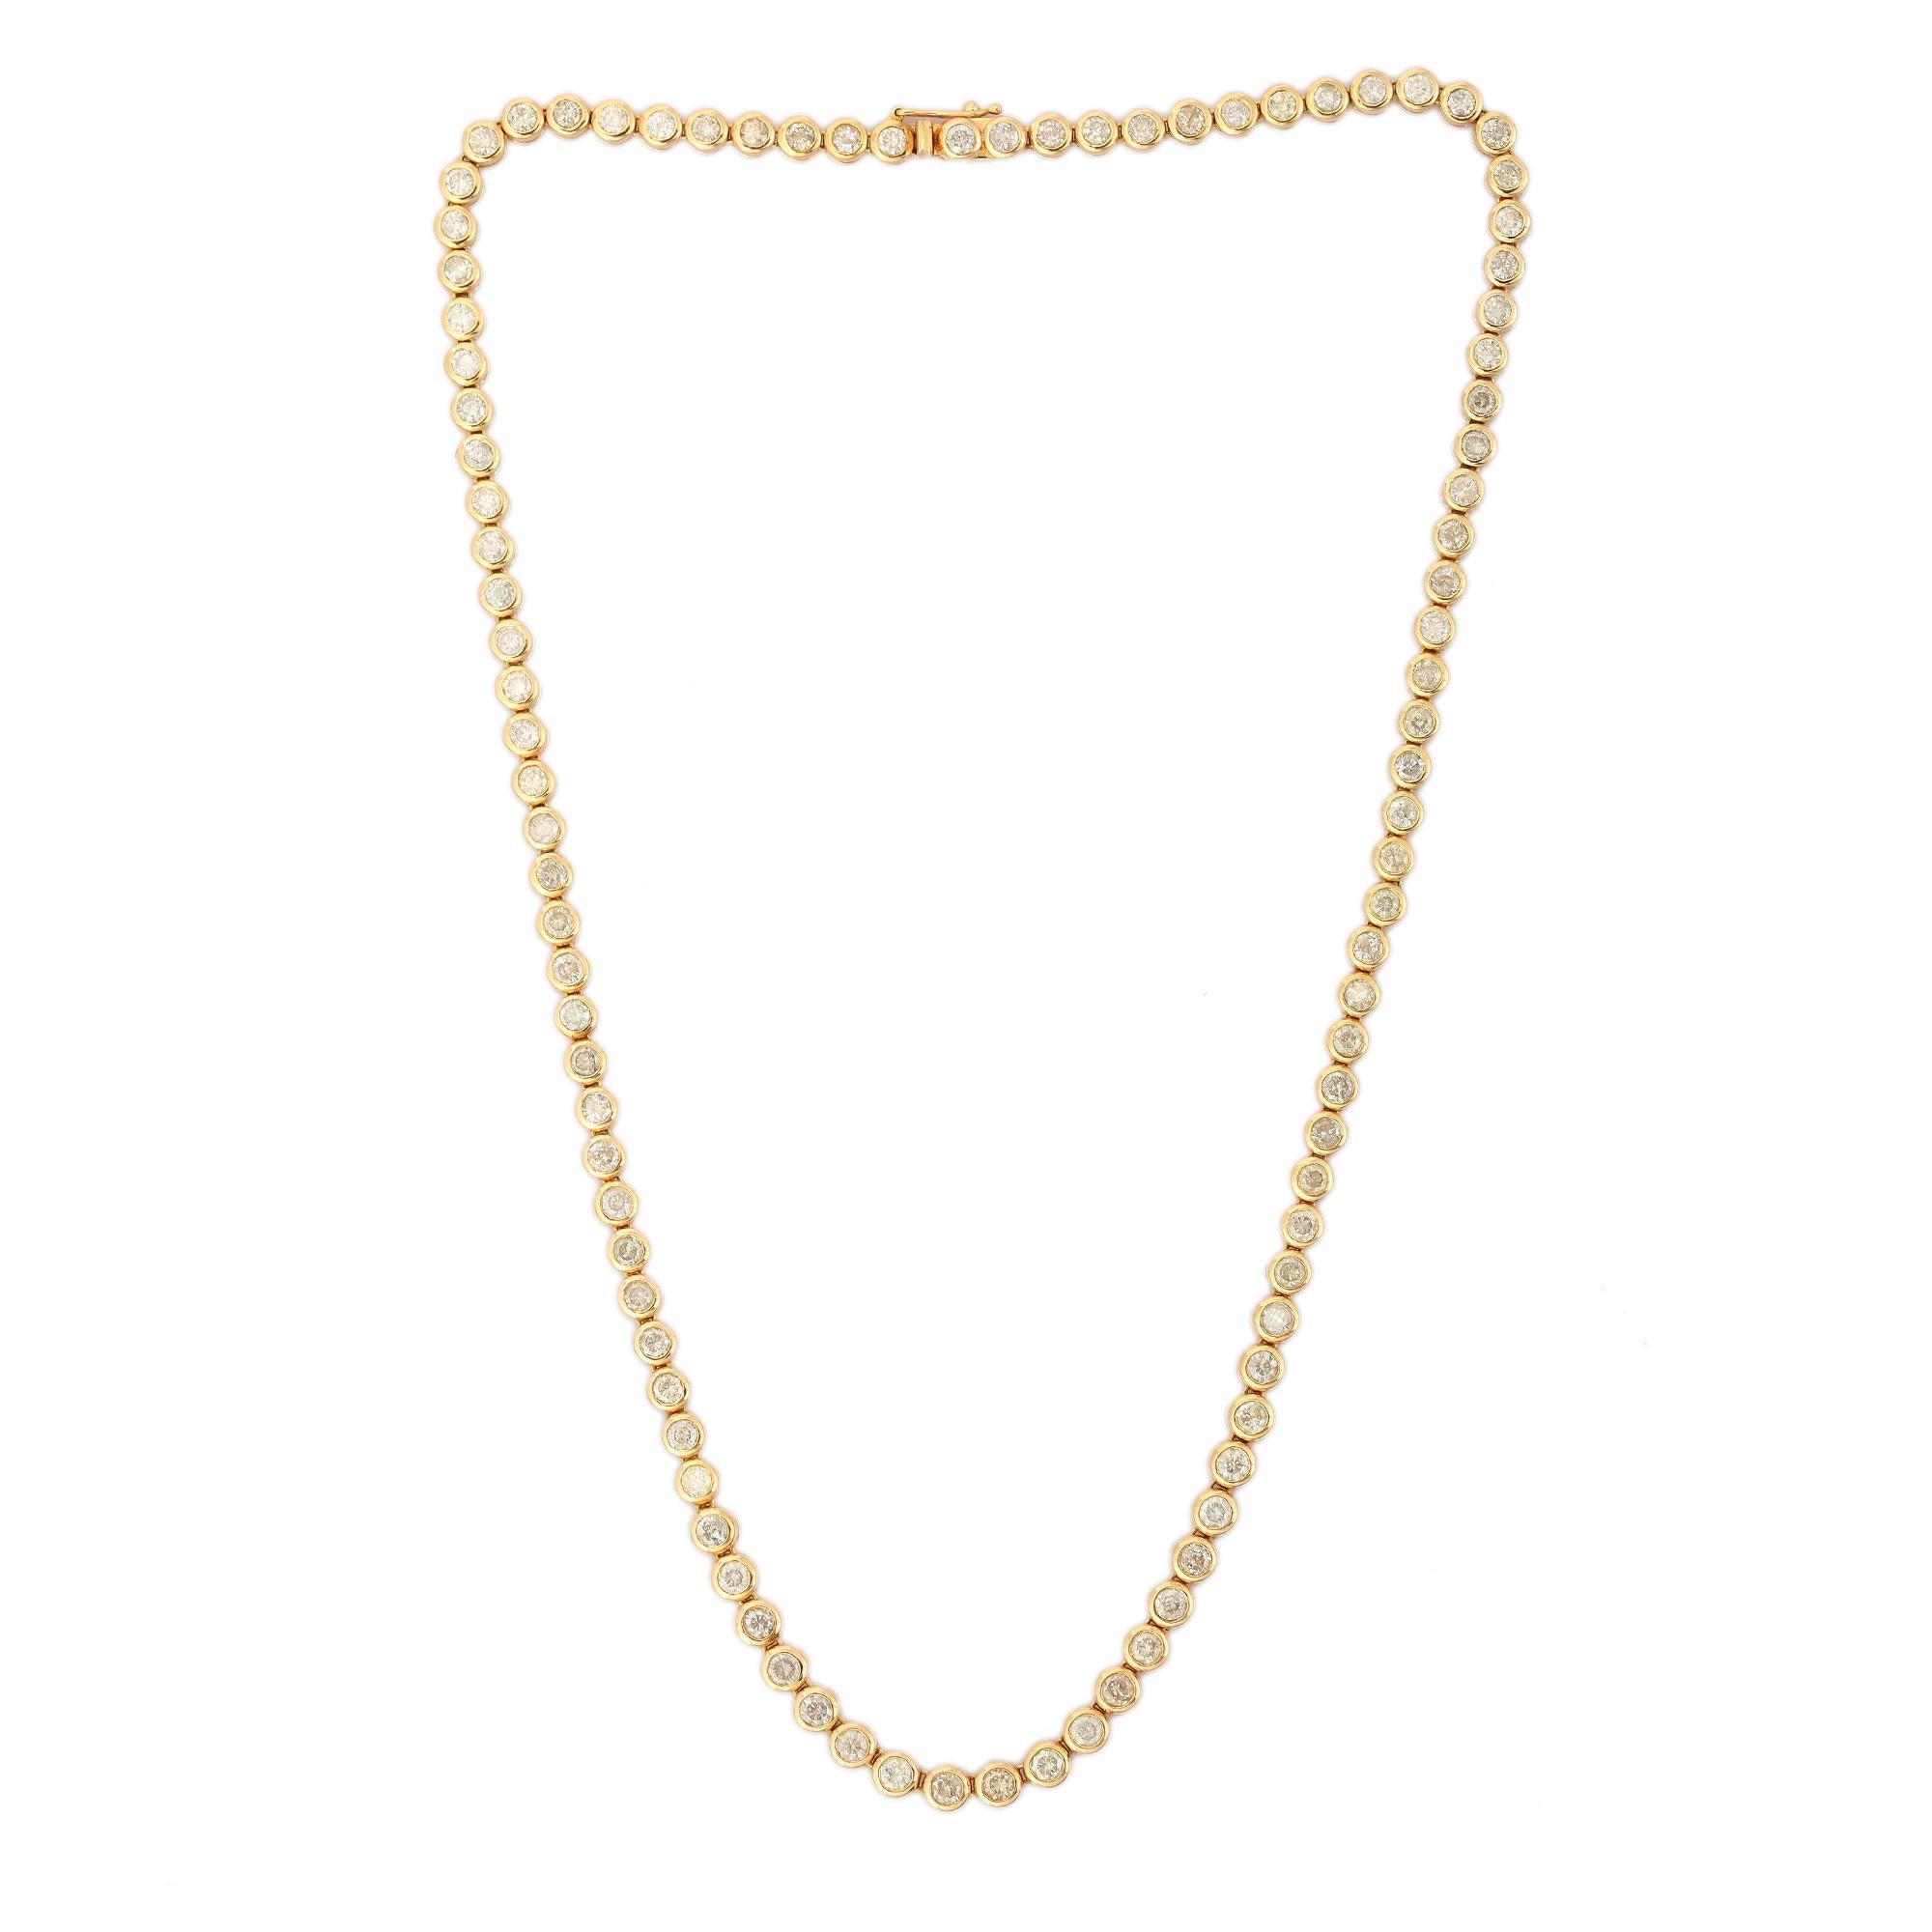 Round Cut 18K Yellow Gold 7.35 Carat Diamond Tennis Necklace Gift for Mom